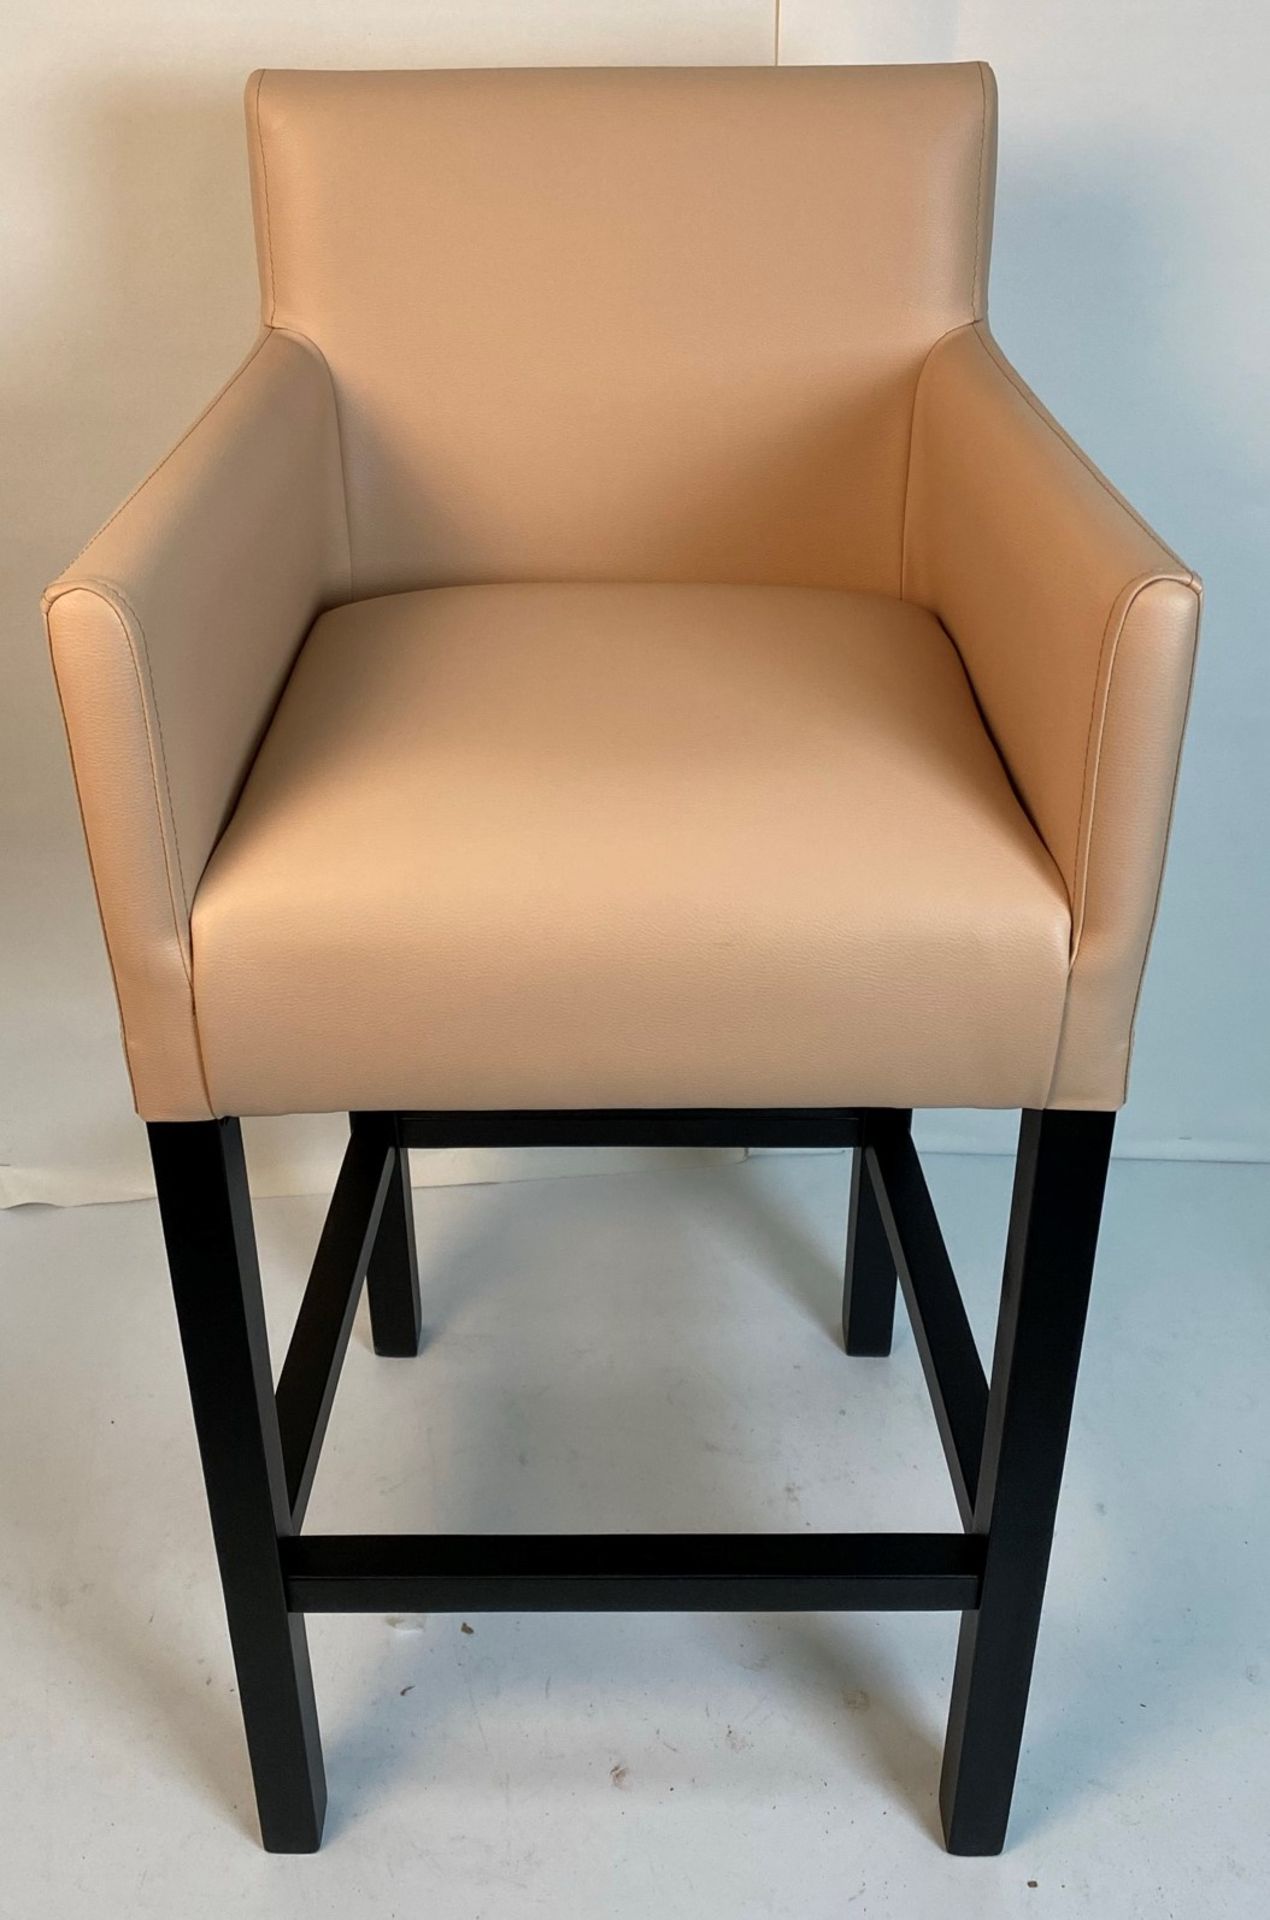 A Vista Vena BE-10 Cappuchino high stool with black wood frame - Image 2 of 8